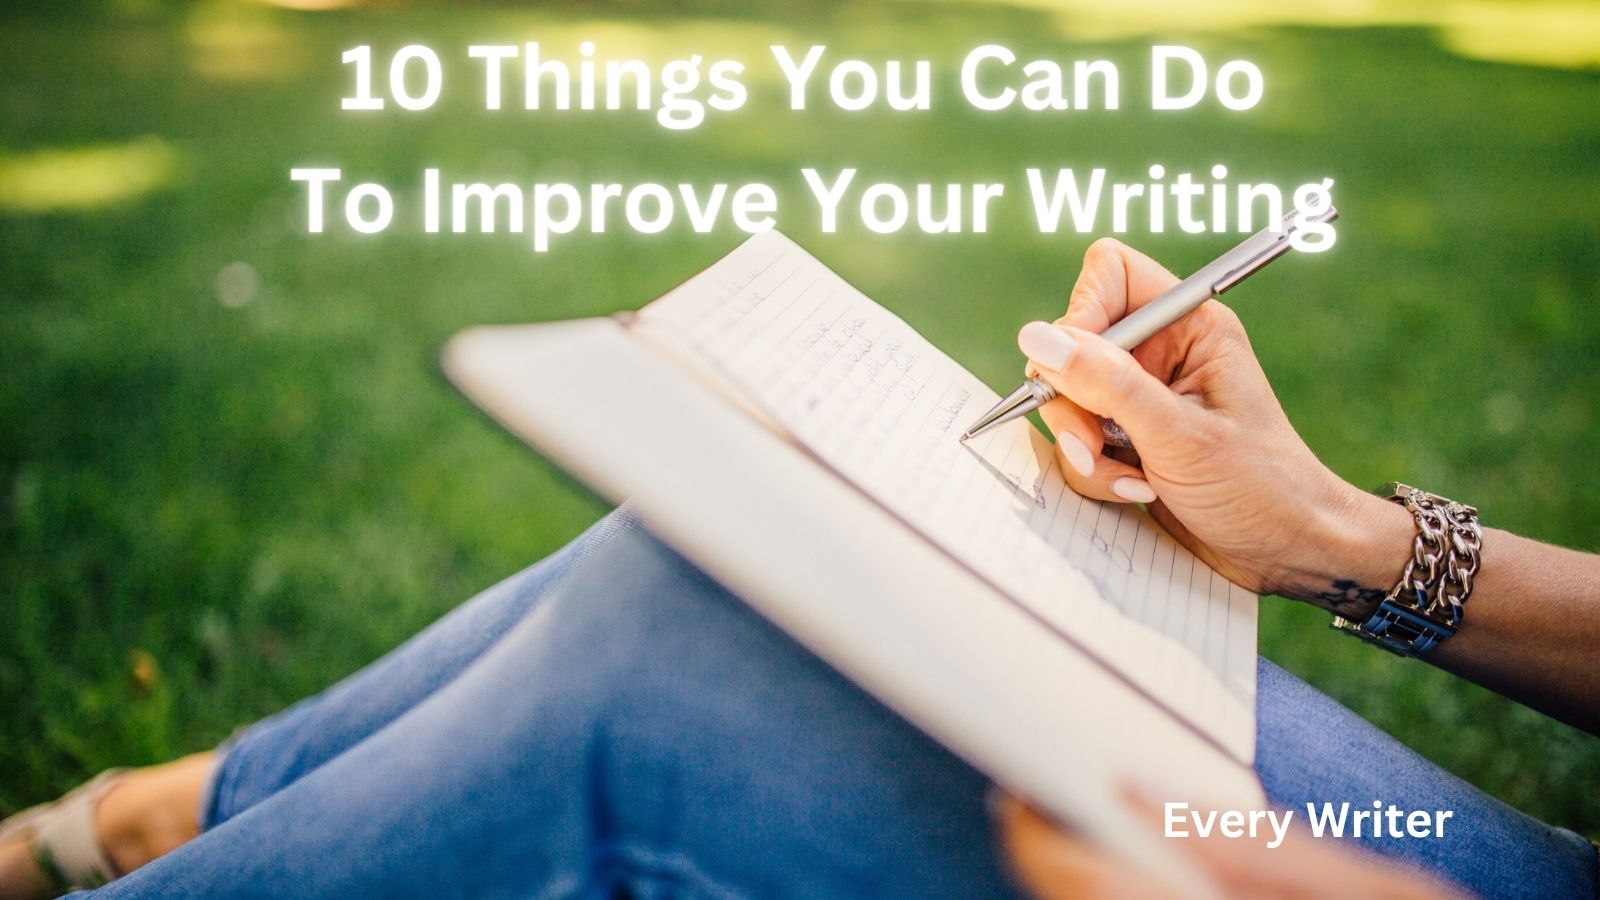 10 Things You Can Do To Improve Your Writing